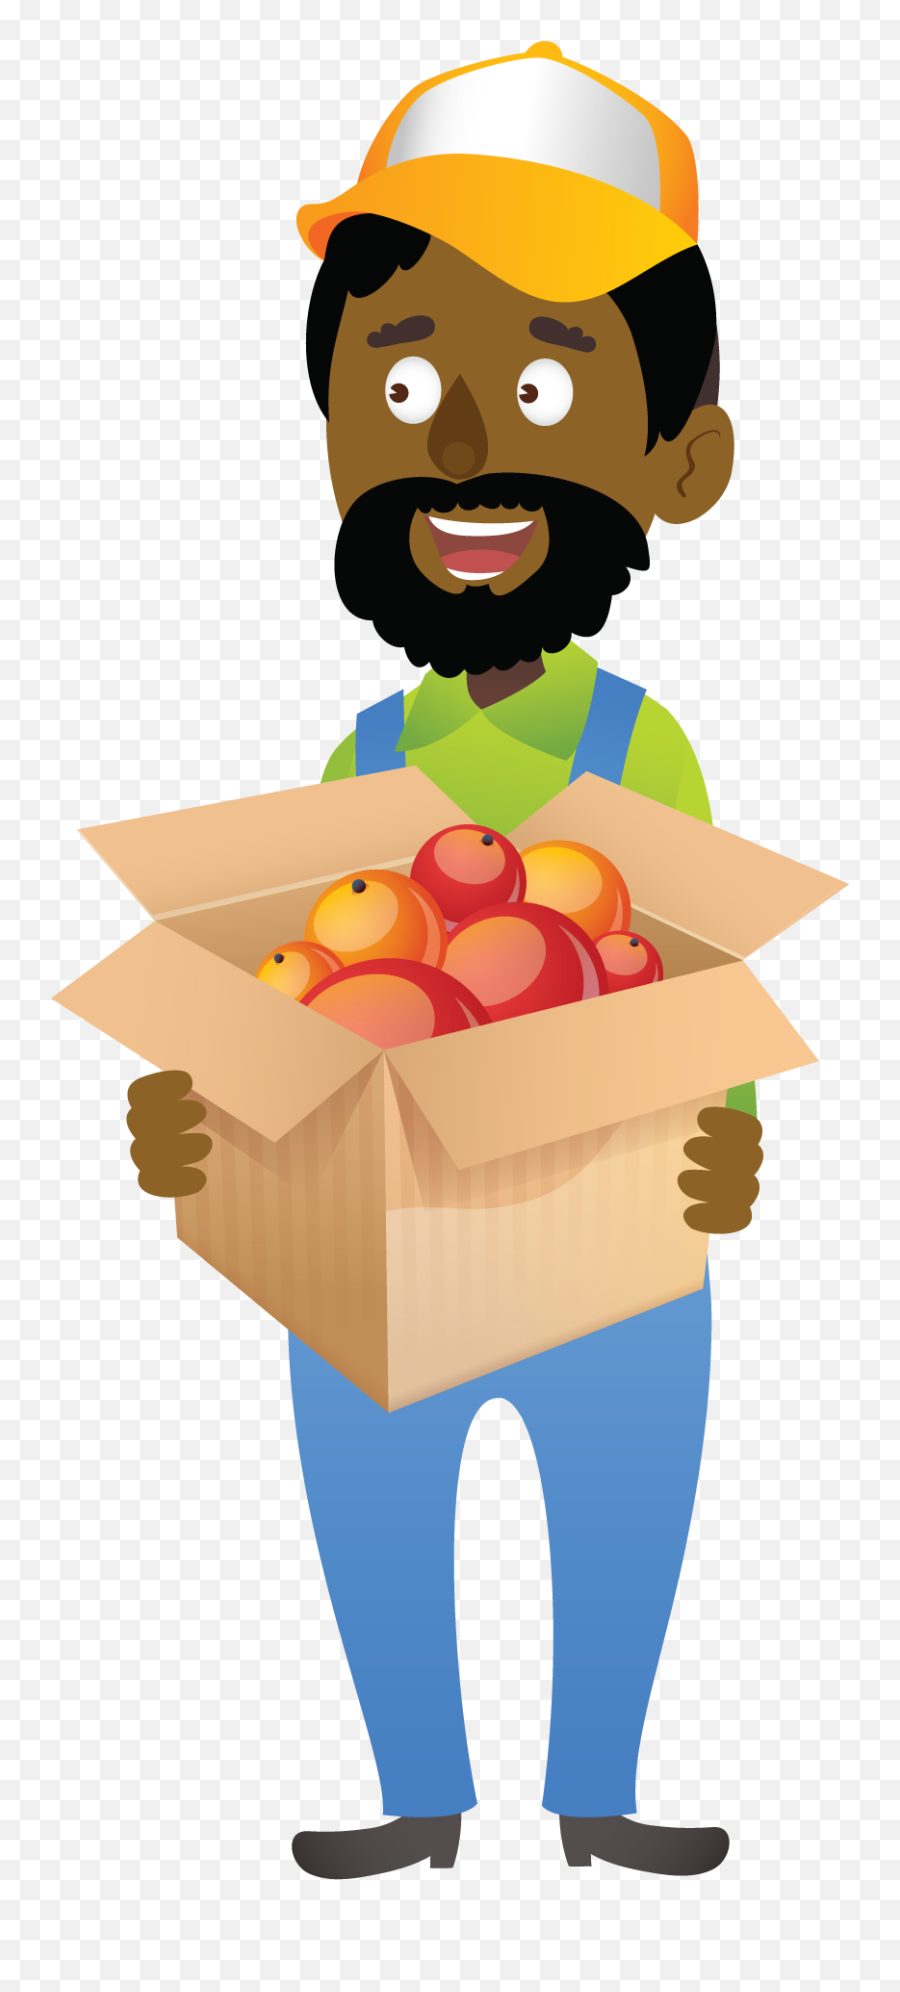 He Is 40 Years Old And Is A Crop Farmer Clipart - Full Size 40 Years Old Farmer Emoji,Crops Clipart